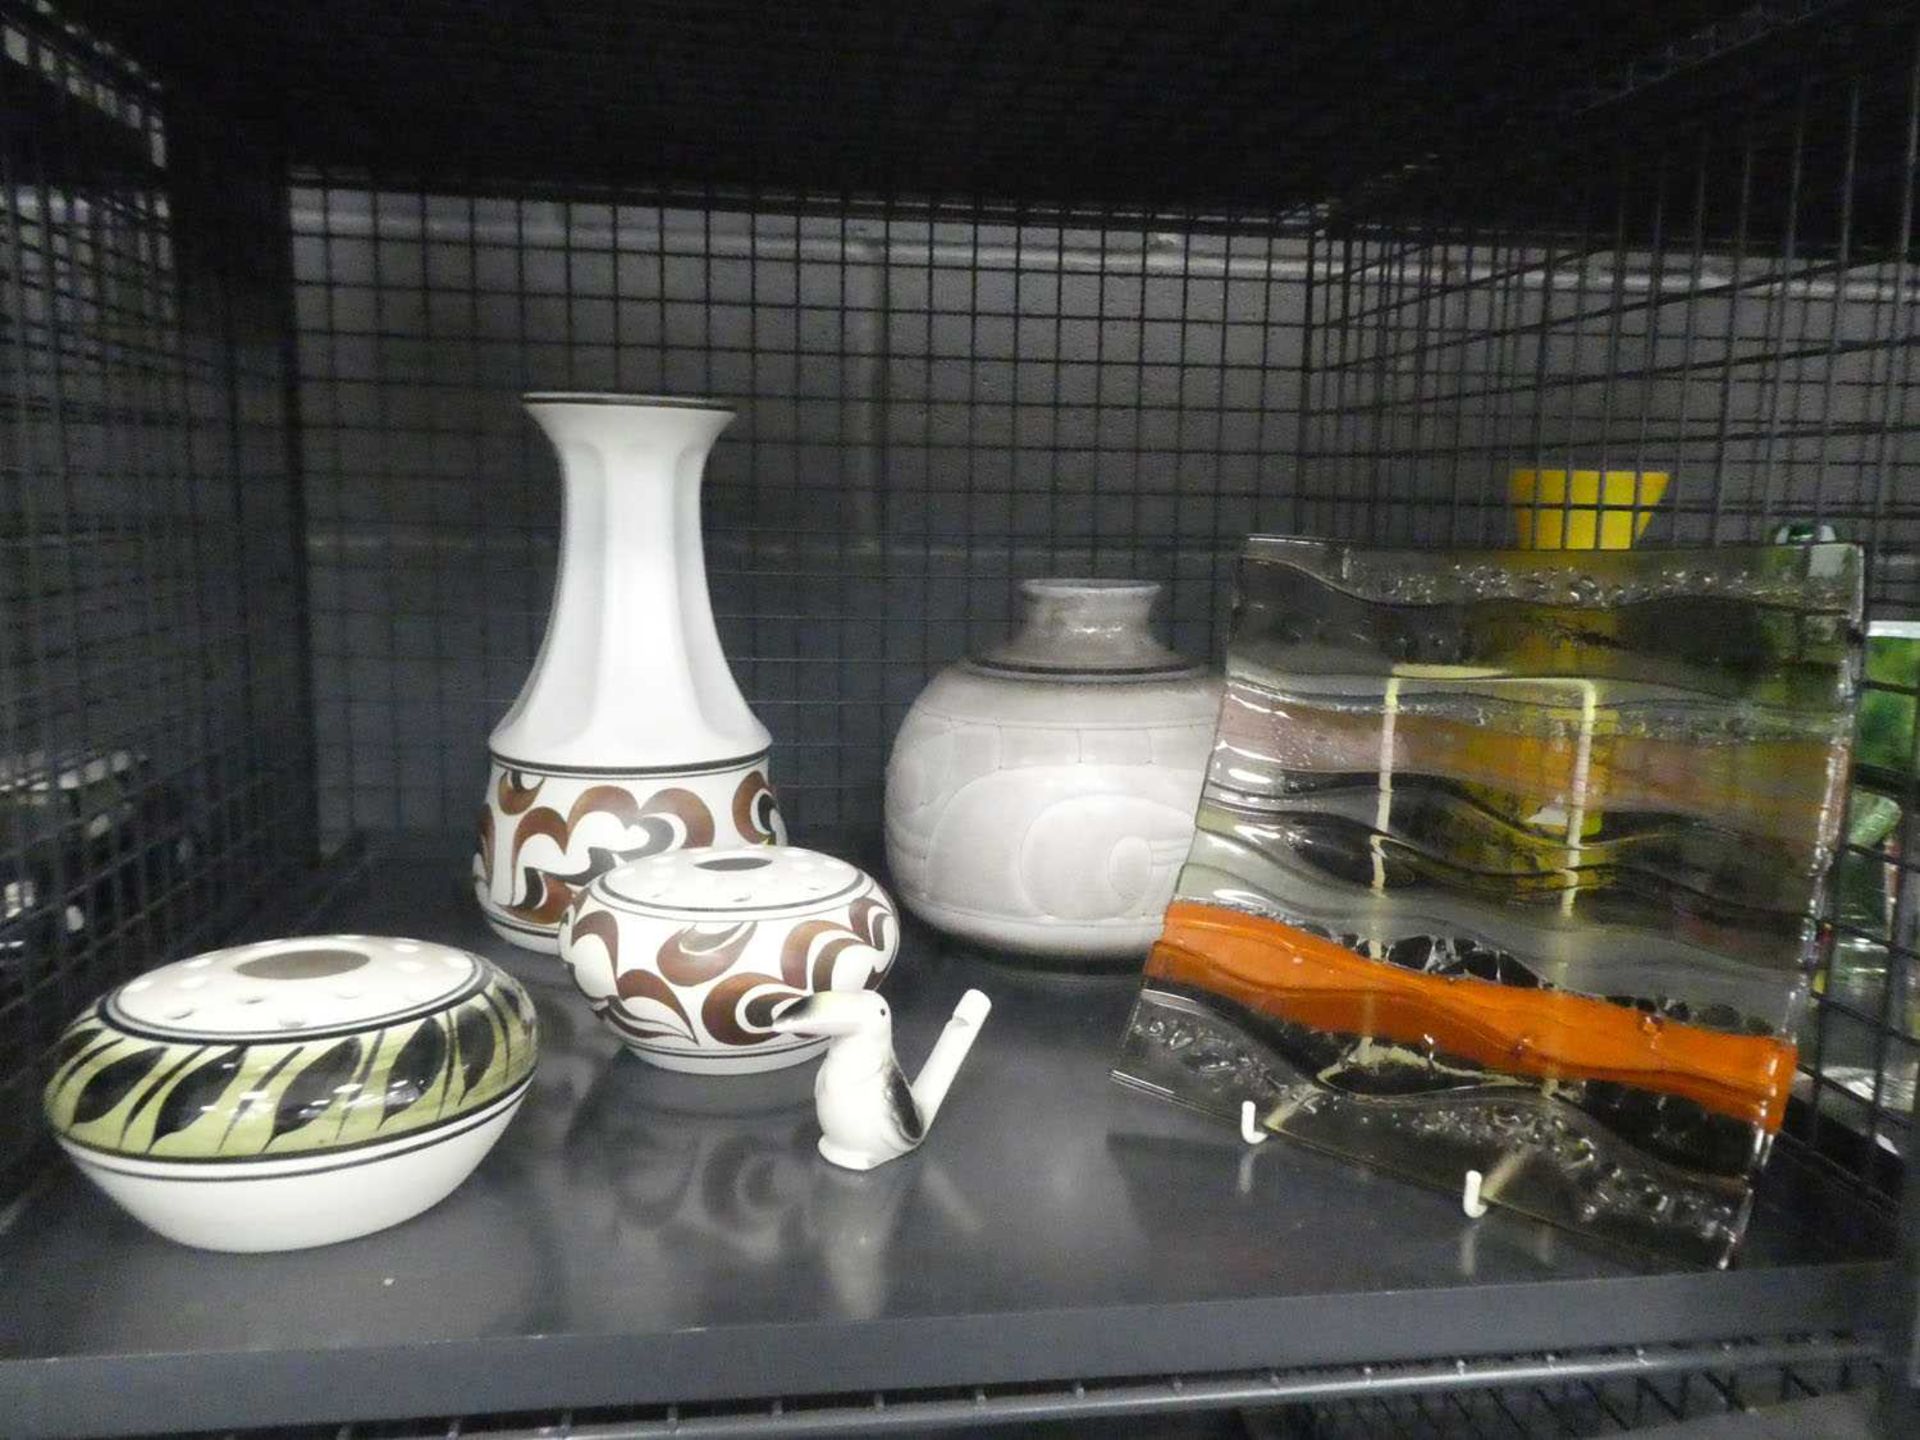 Cage containing studio pottery, glass bowl, and toucan whistle